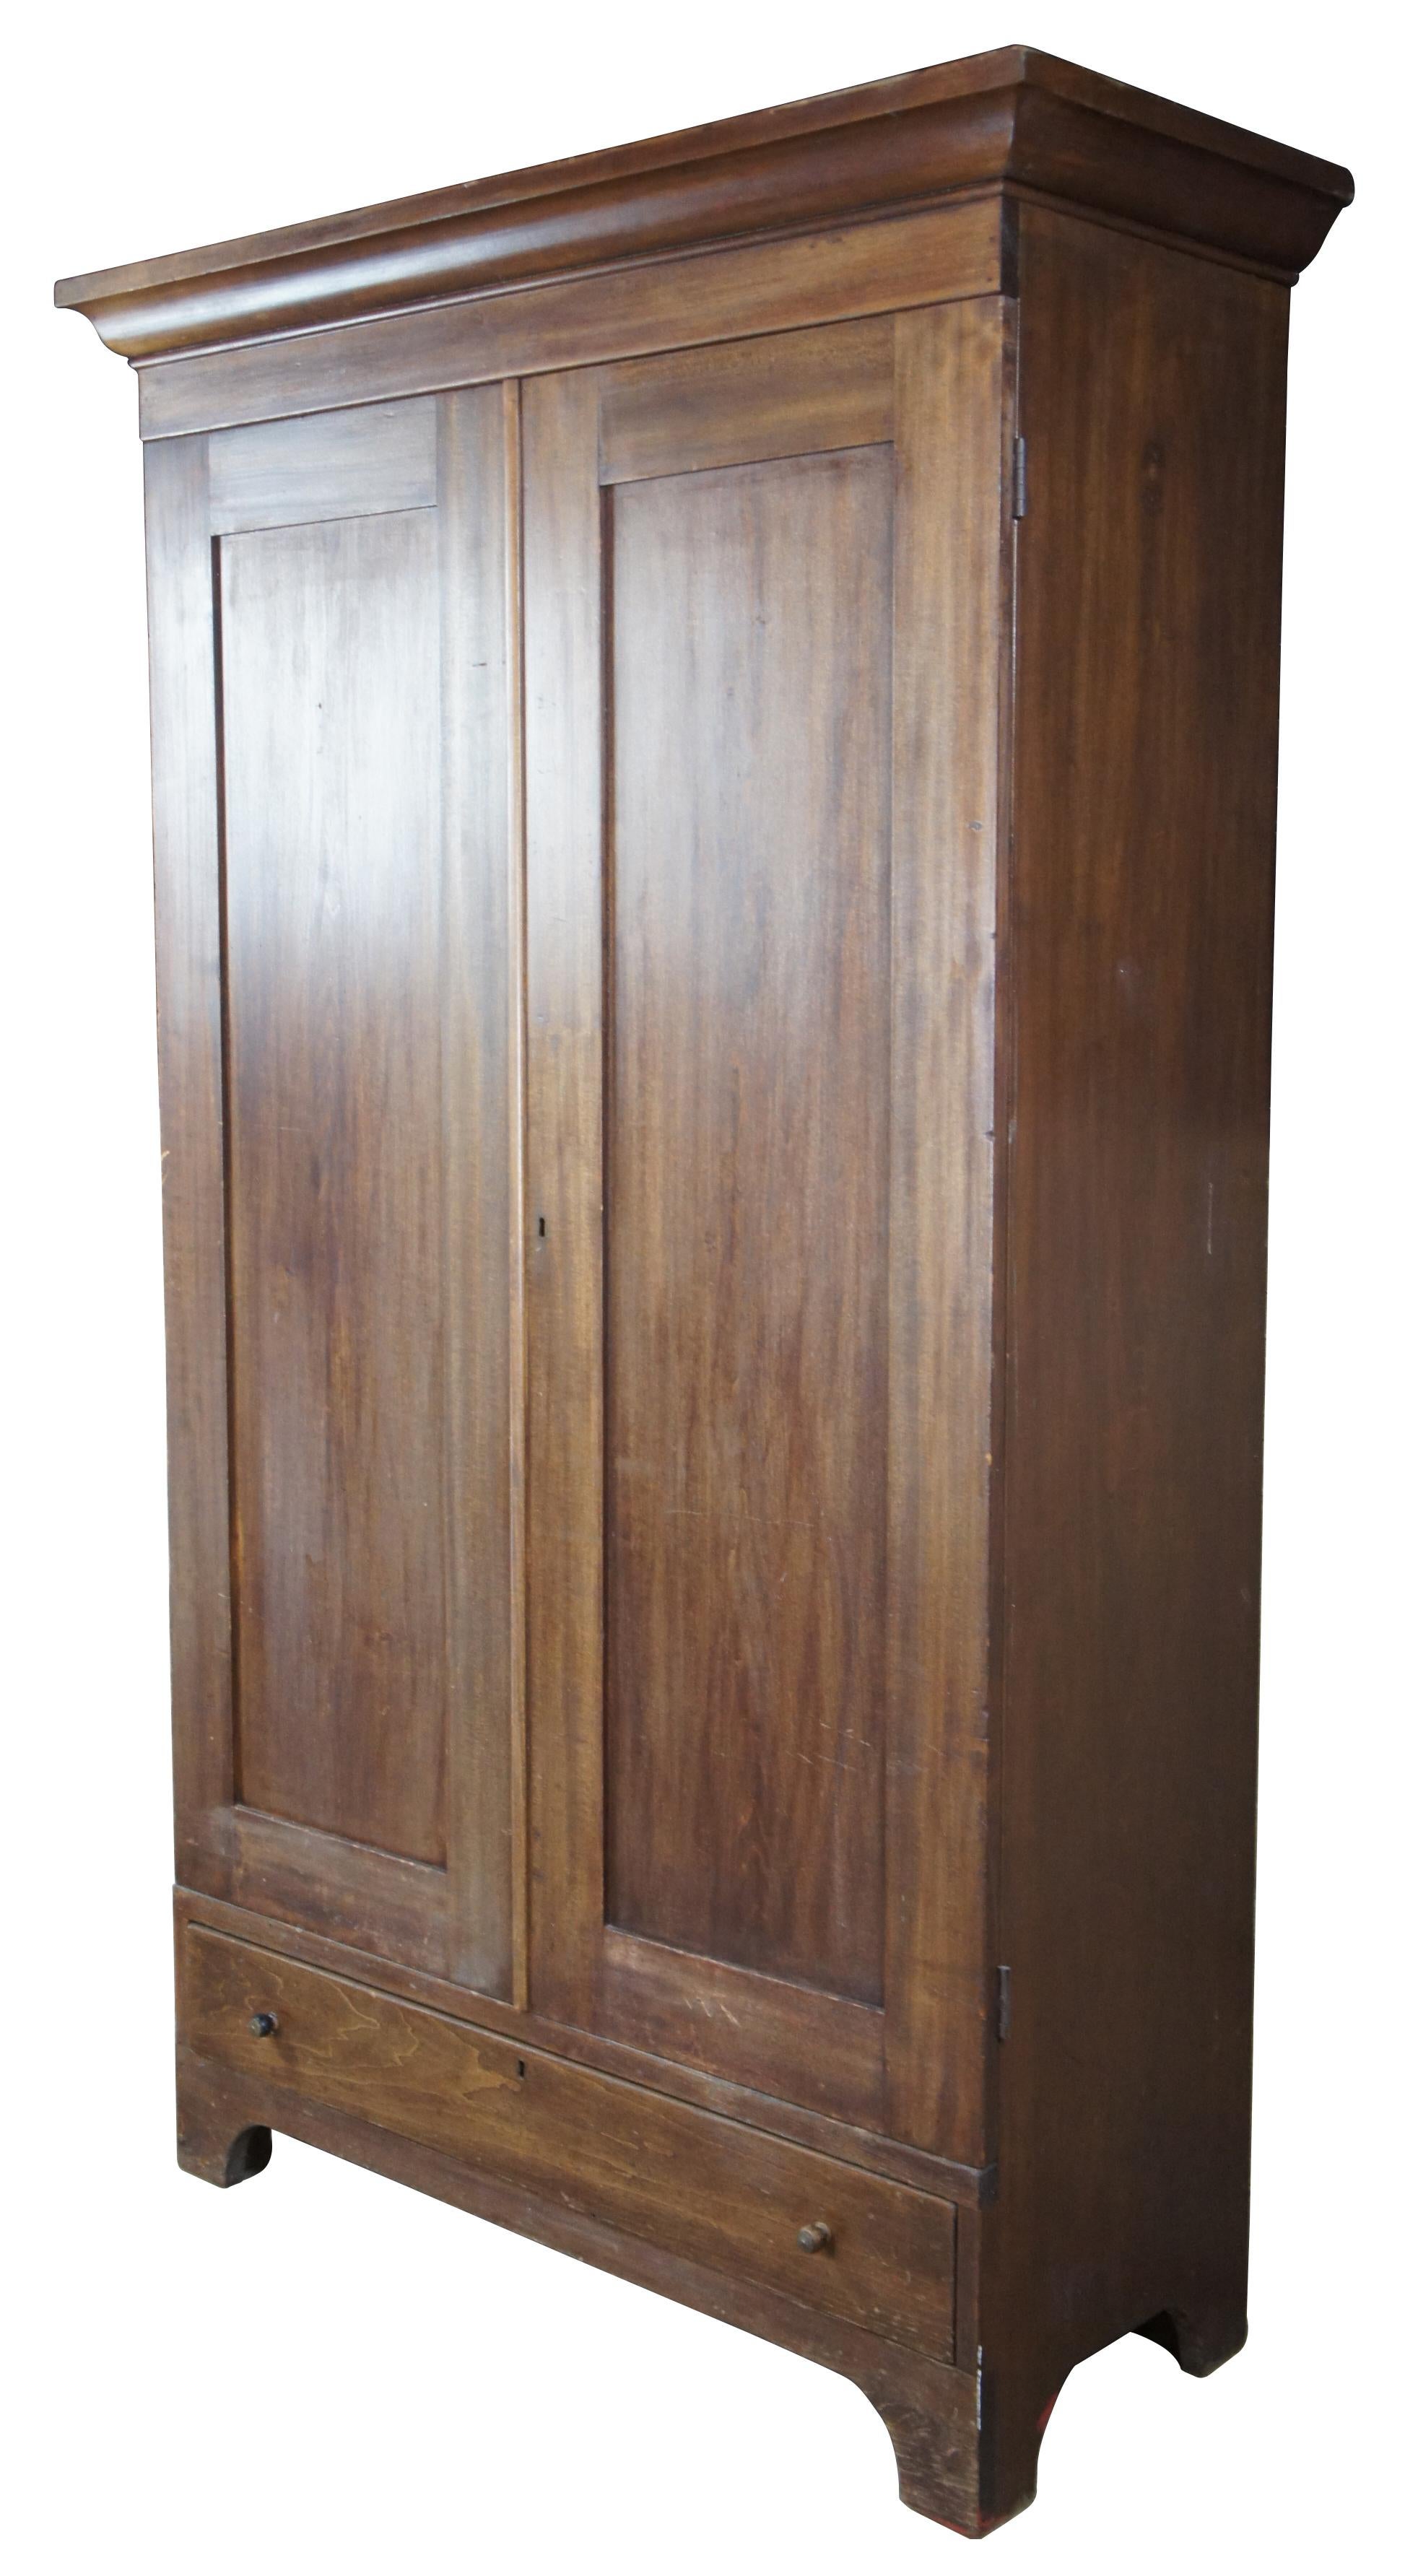 Primitive early American farmhouse style clothing armoire. Made of walnut, featuring a hanging bar and one central lower drawer, circa 1870s. Measure: 84